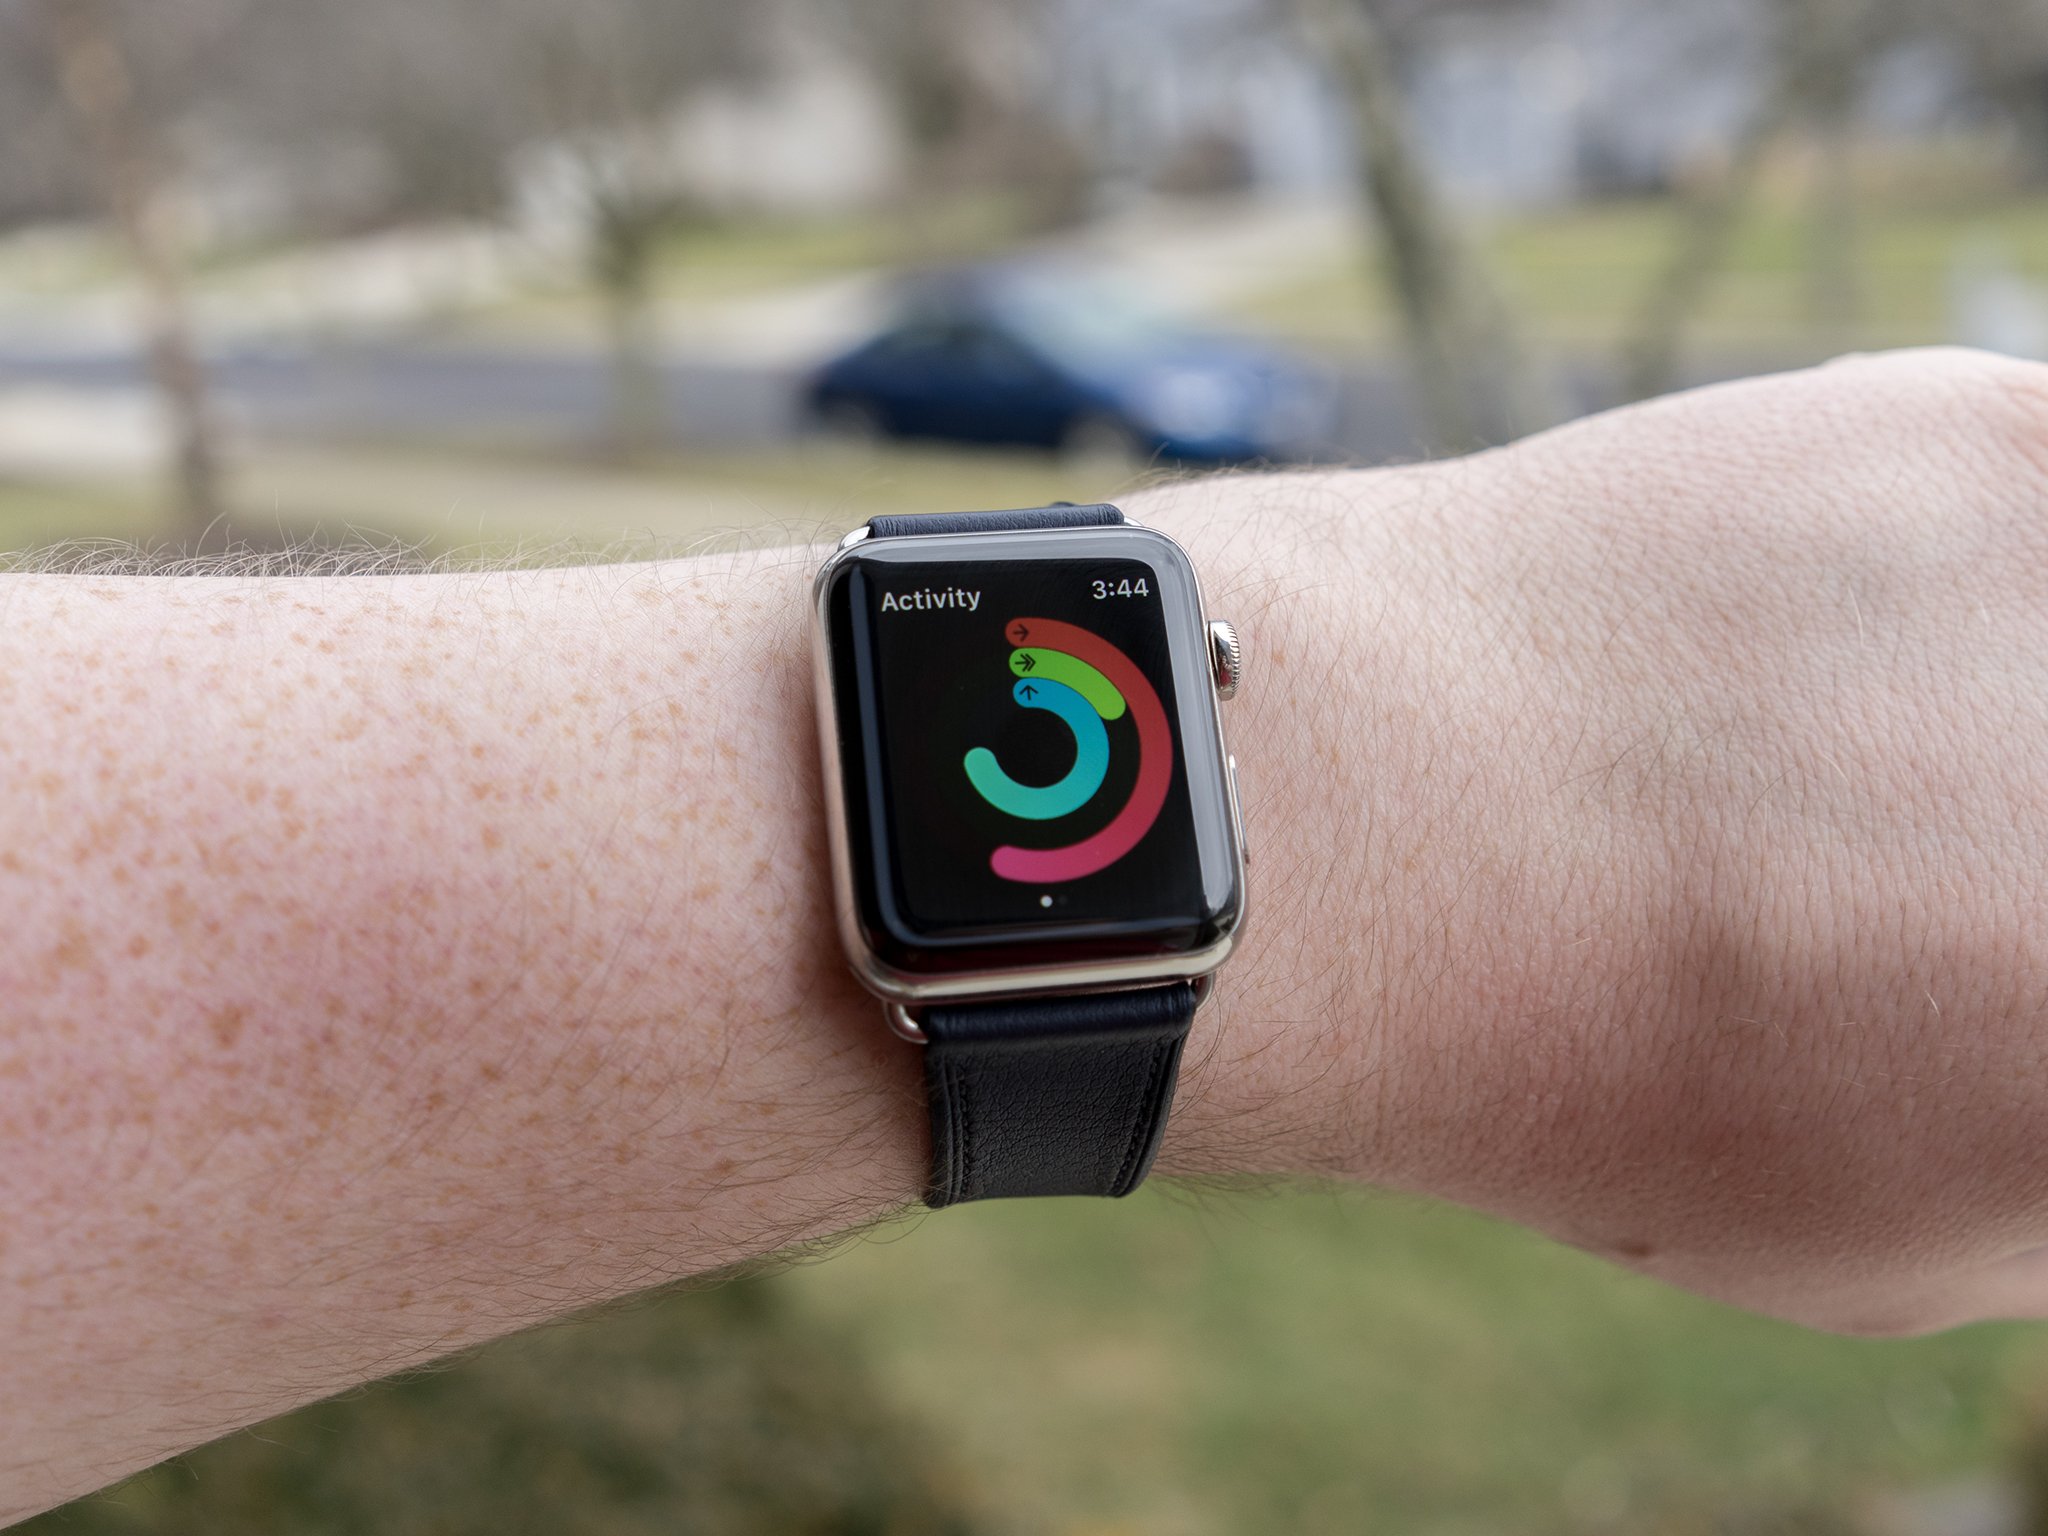 How to download watchOS 5 beta 1 to your Apple Watch